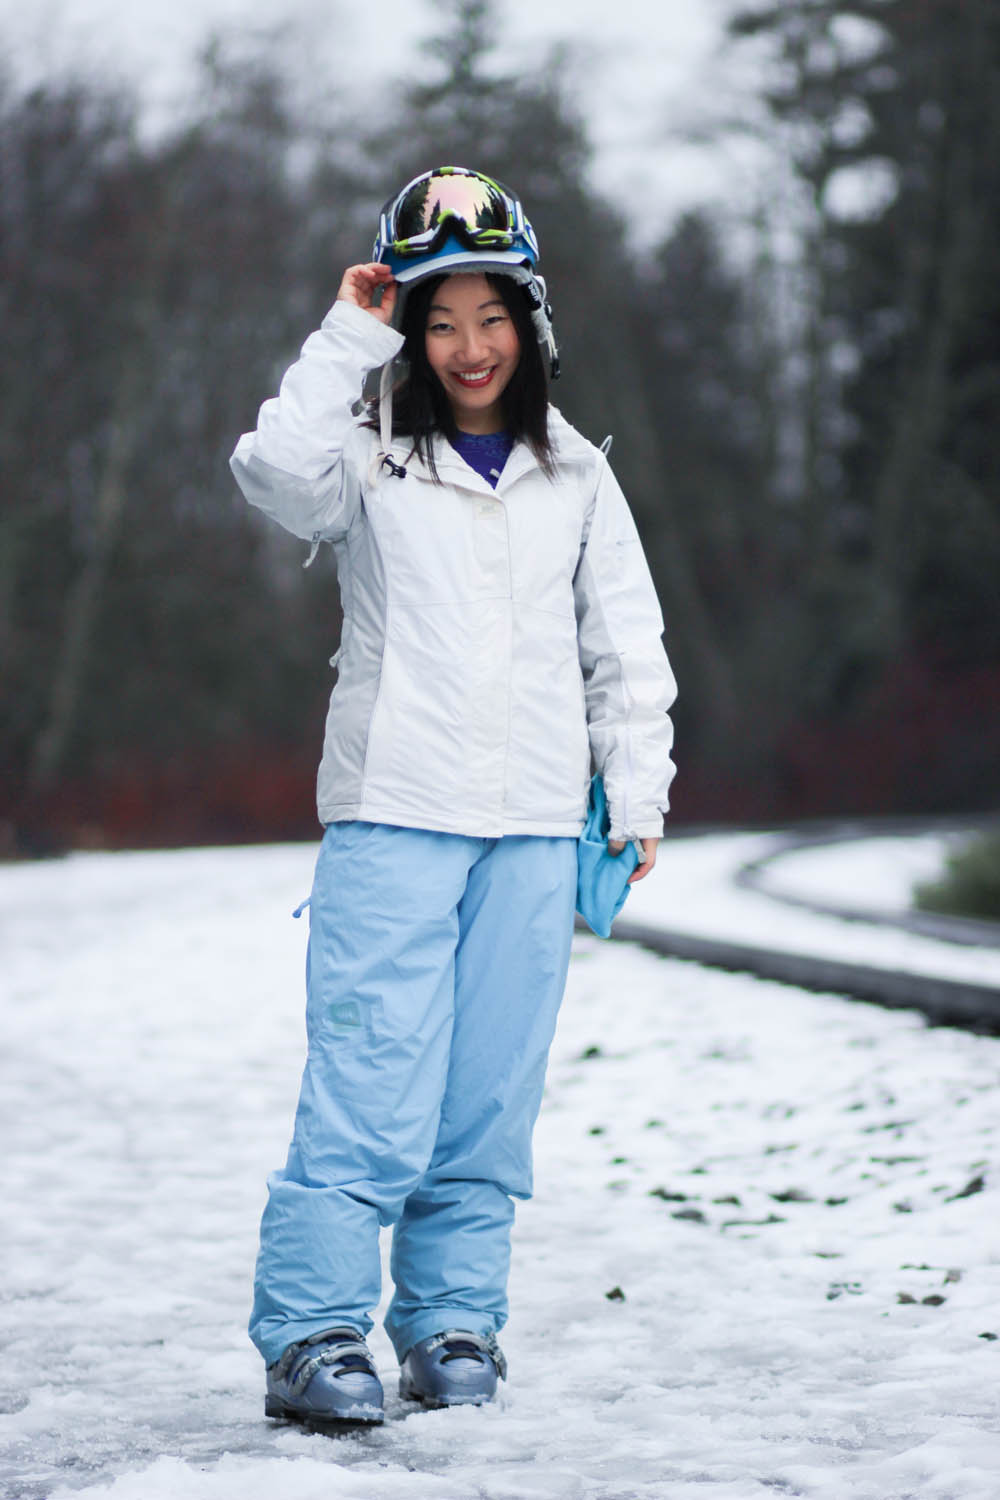 Helly Hansen ski and snowboard gear | Stuff I Love, Vancouver Style Blog 